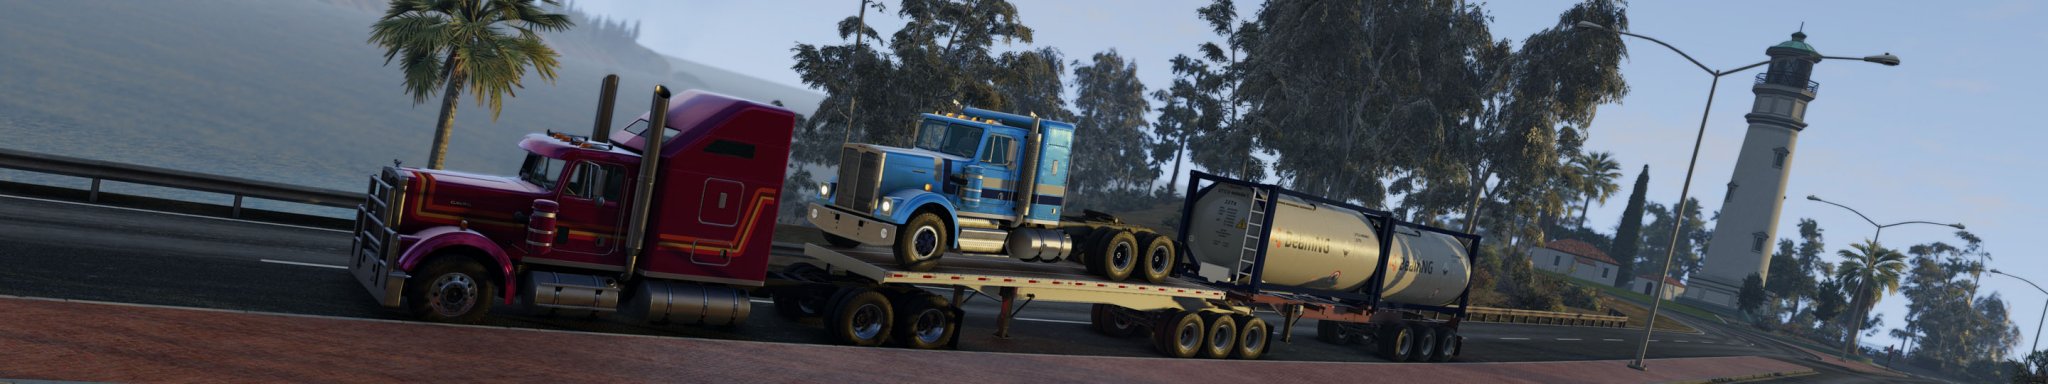 3 BeamNG Gavril T83 Long Haul CUSTOM with 2 TRAILERS at REFINERY copy.jpg